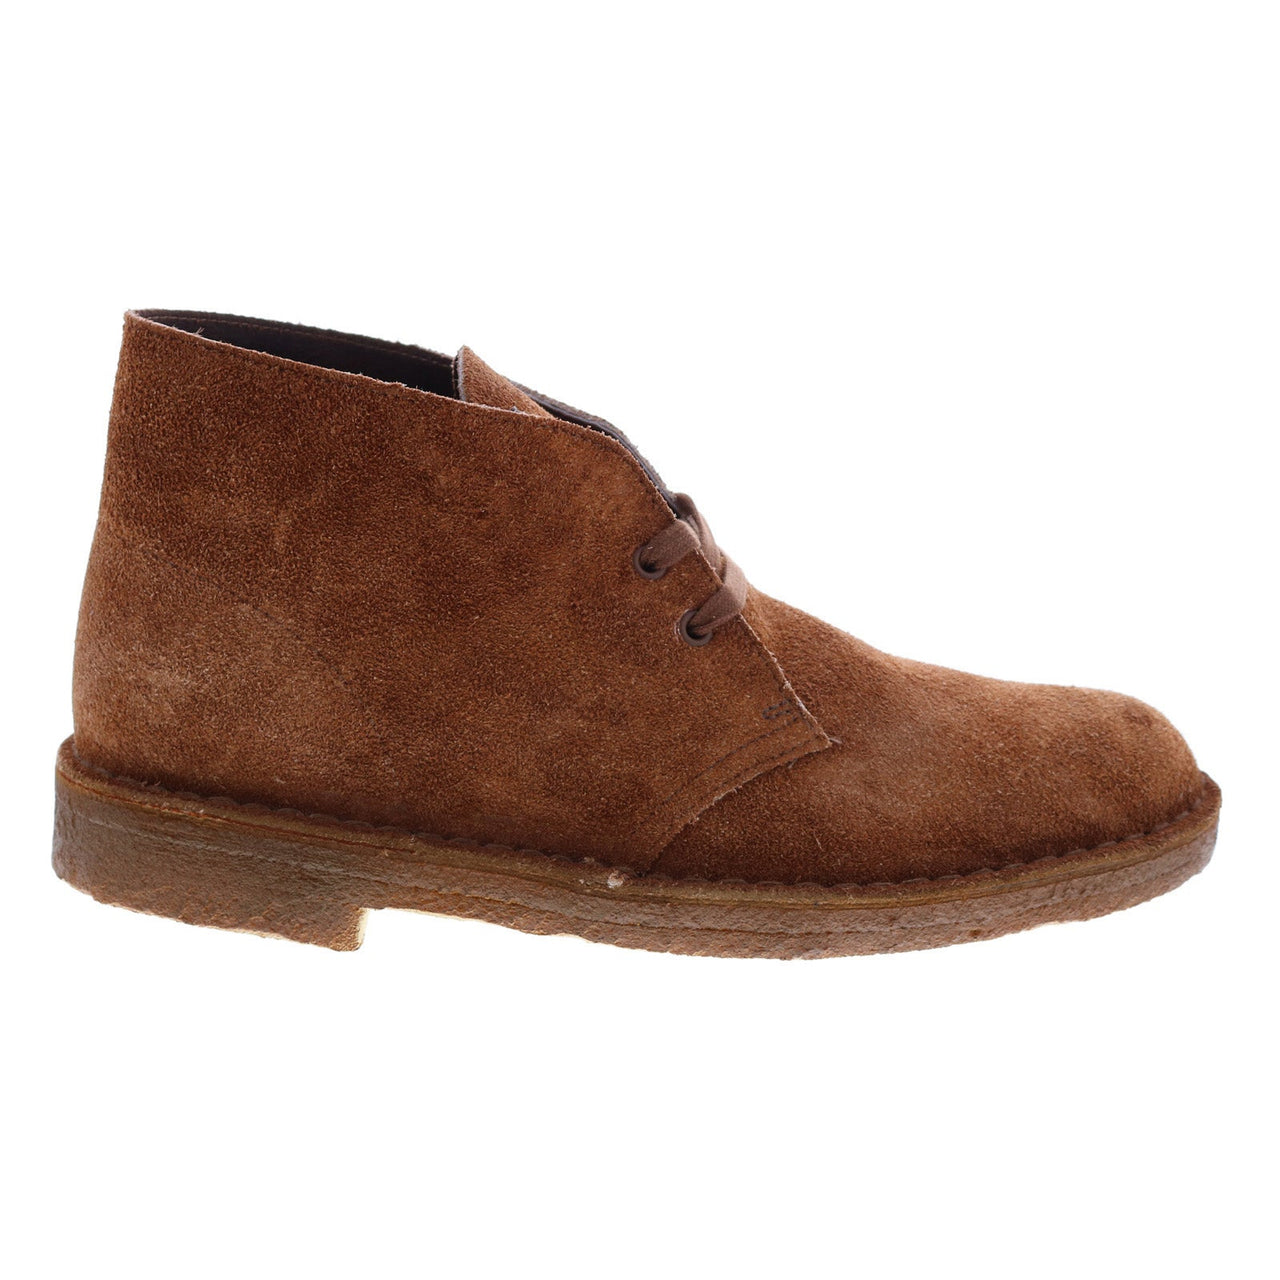 Men's brown suede lace up chukka boots by Clarks, style 26168531